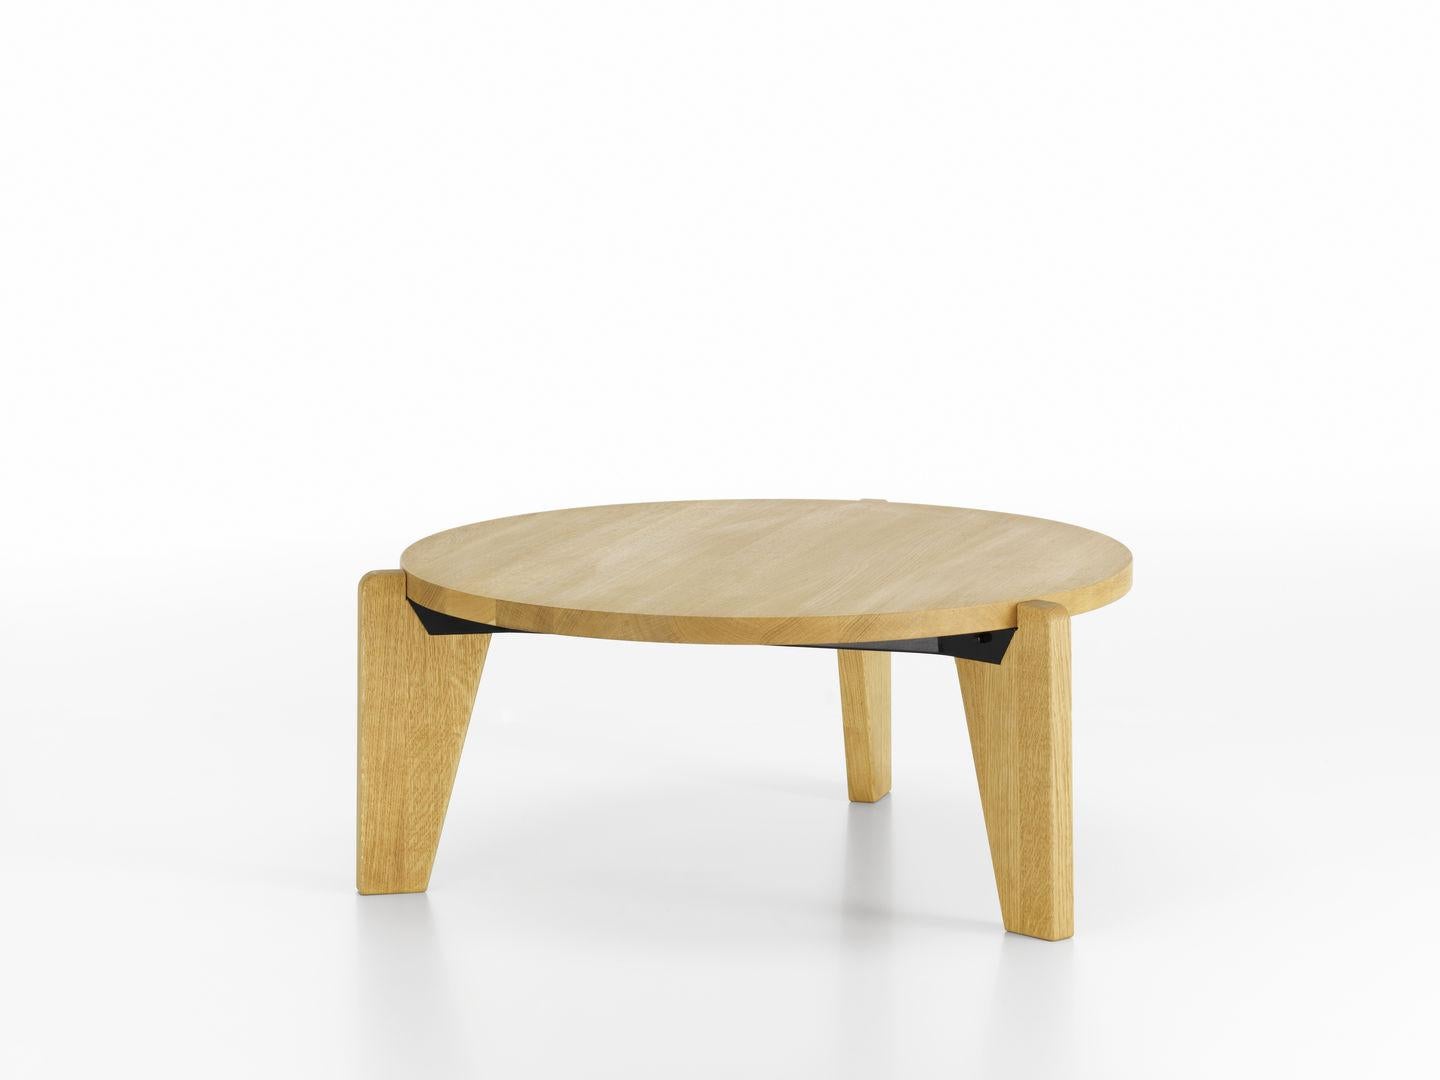 Coffee table designed by Jean Prouvé in 1944.
Manufactured by Vitra, Switzerland.

In the early 1940s, Jean Prouvé began to work more extensively with wood. The Guéridon Bas table has a heavy top in solid oak or American walnut resting on three